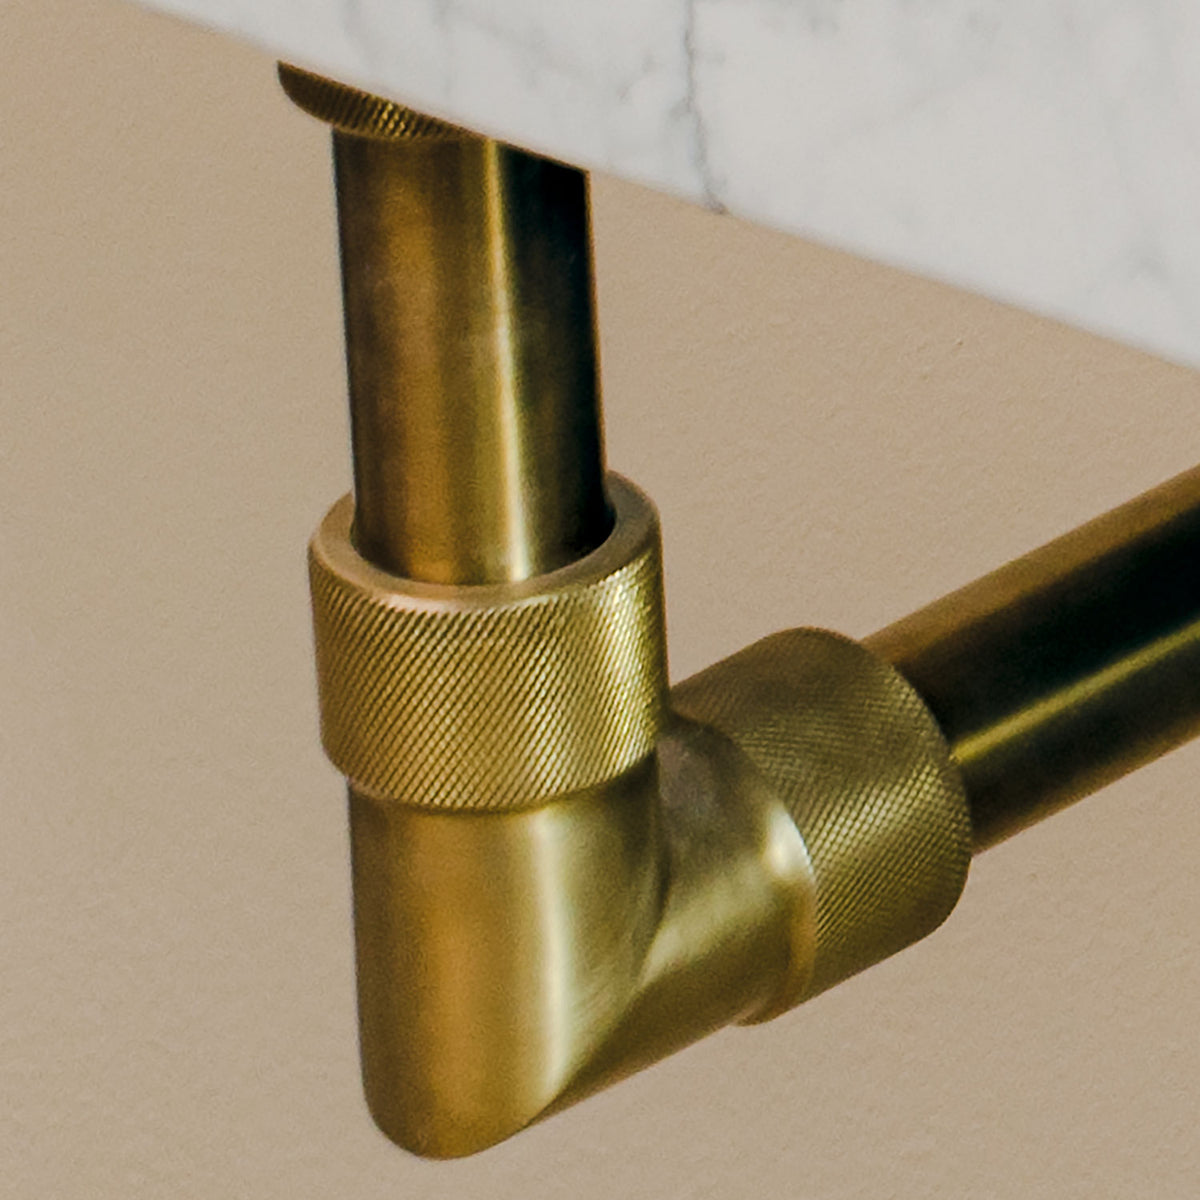 detail of Elemental Classic fitting in aged brass image 2 of 3